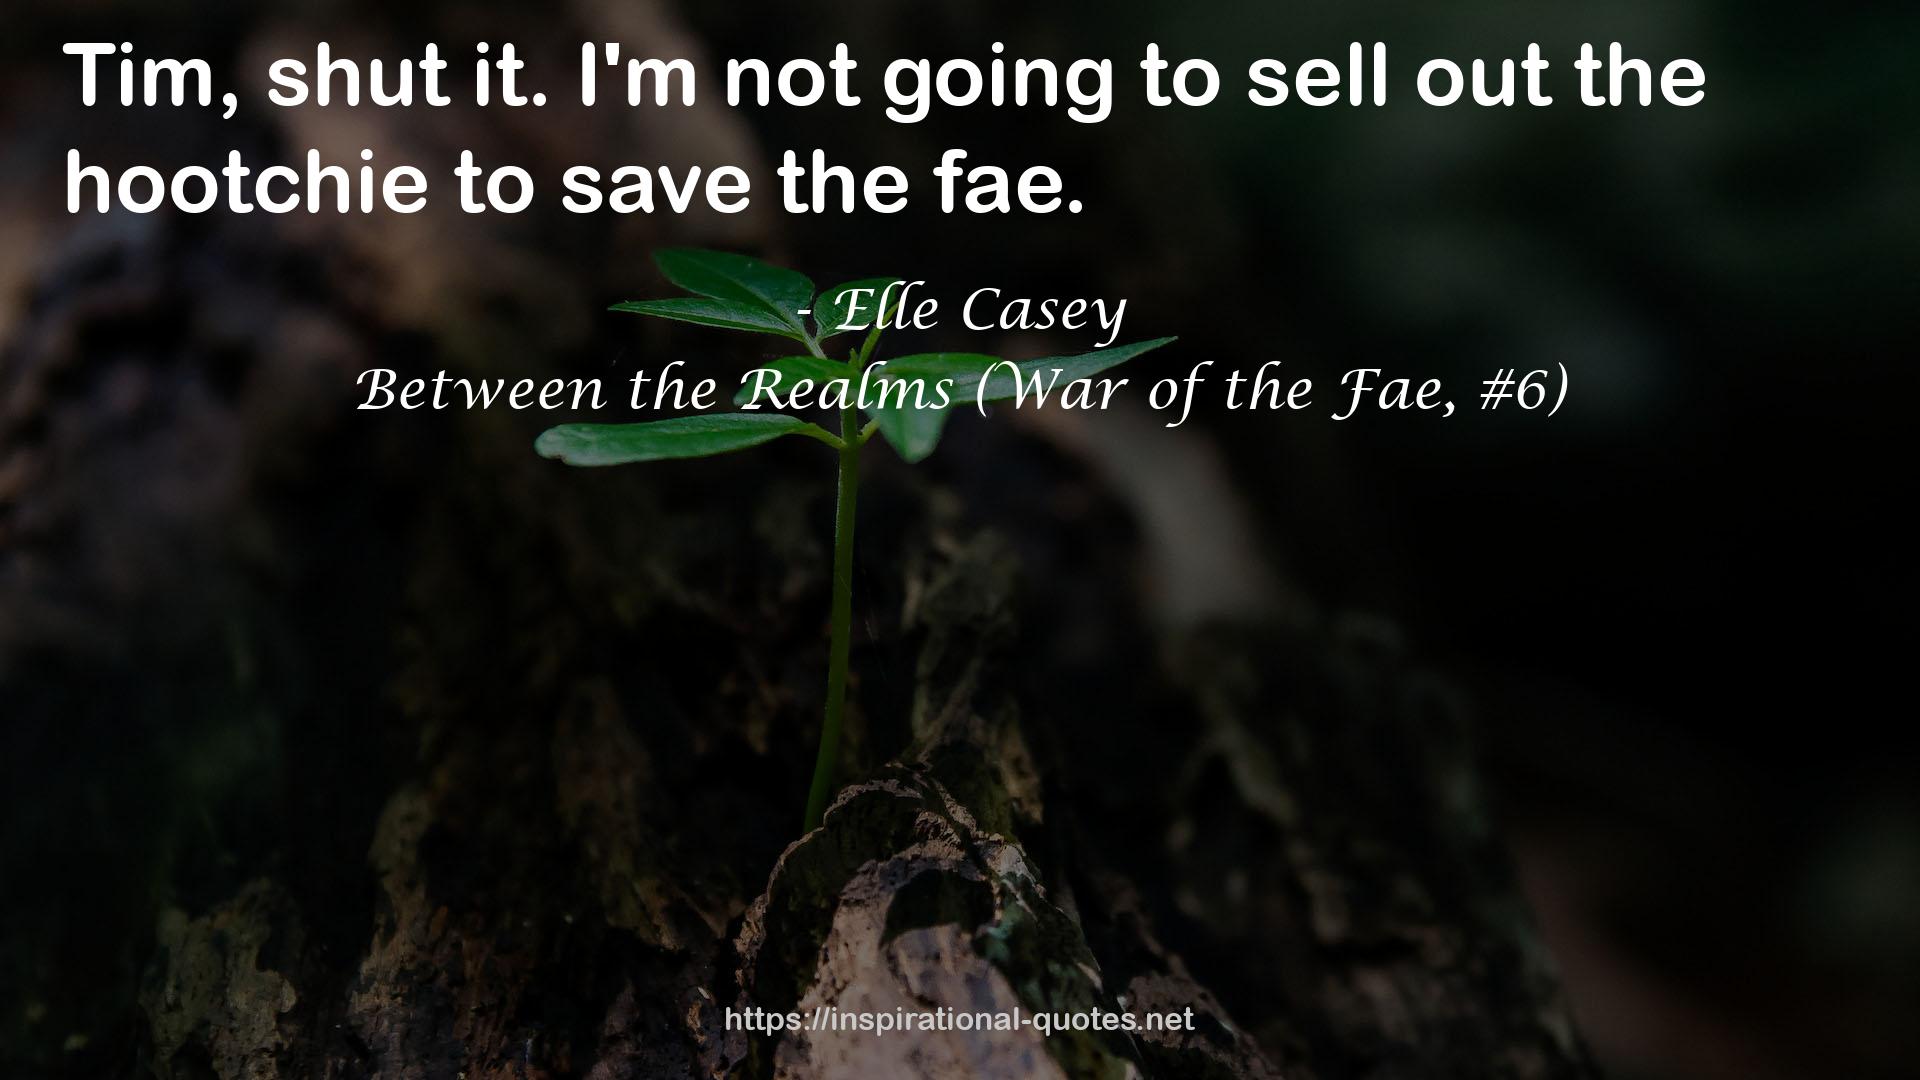 Between the Realms (War of the Fae, #6) QUOTES